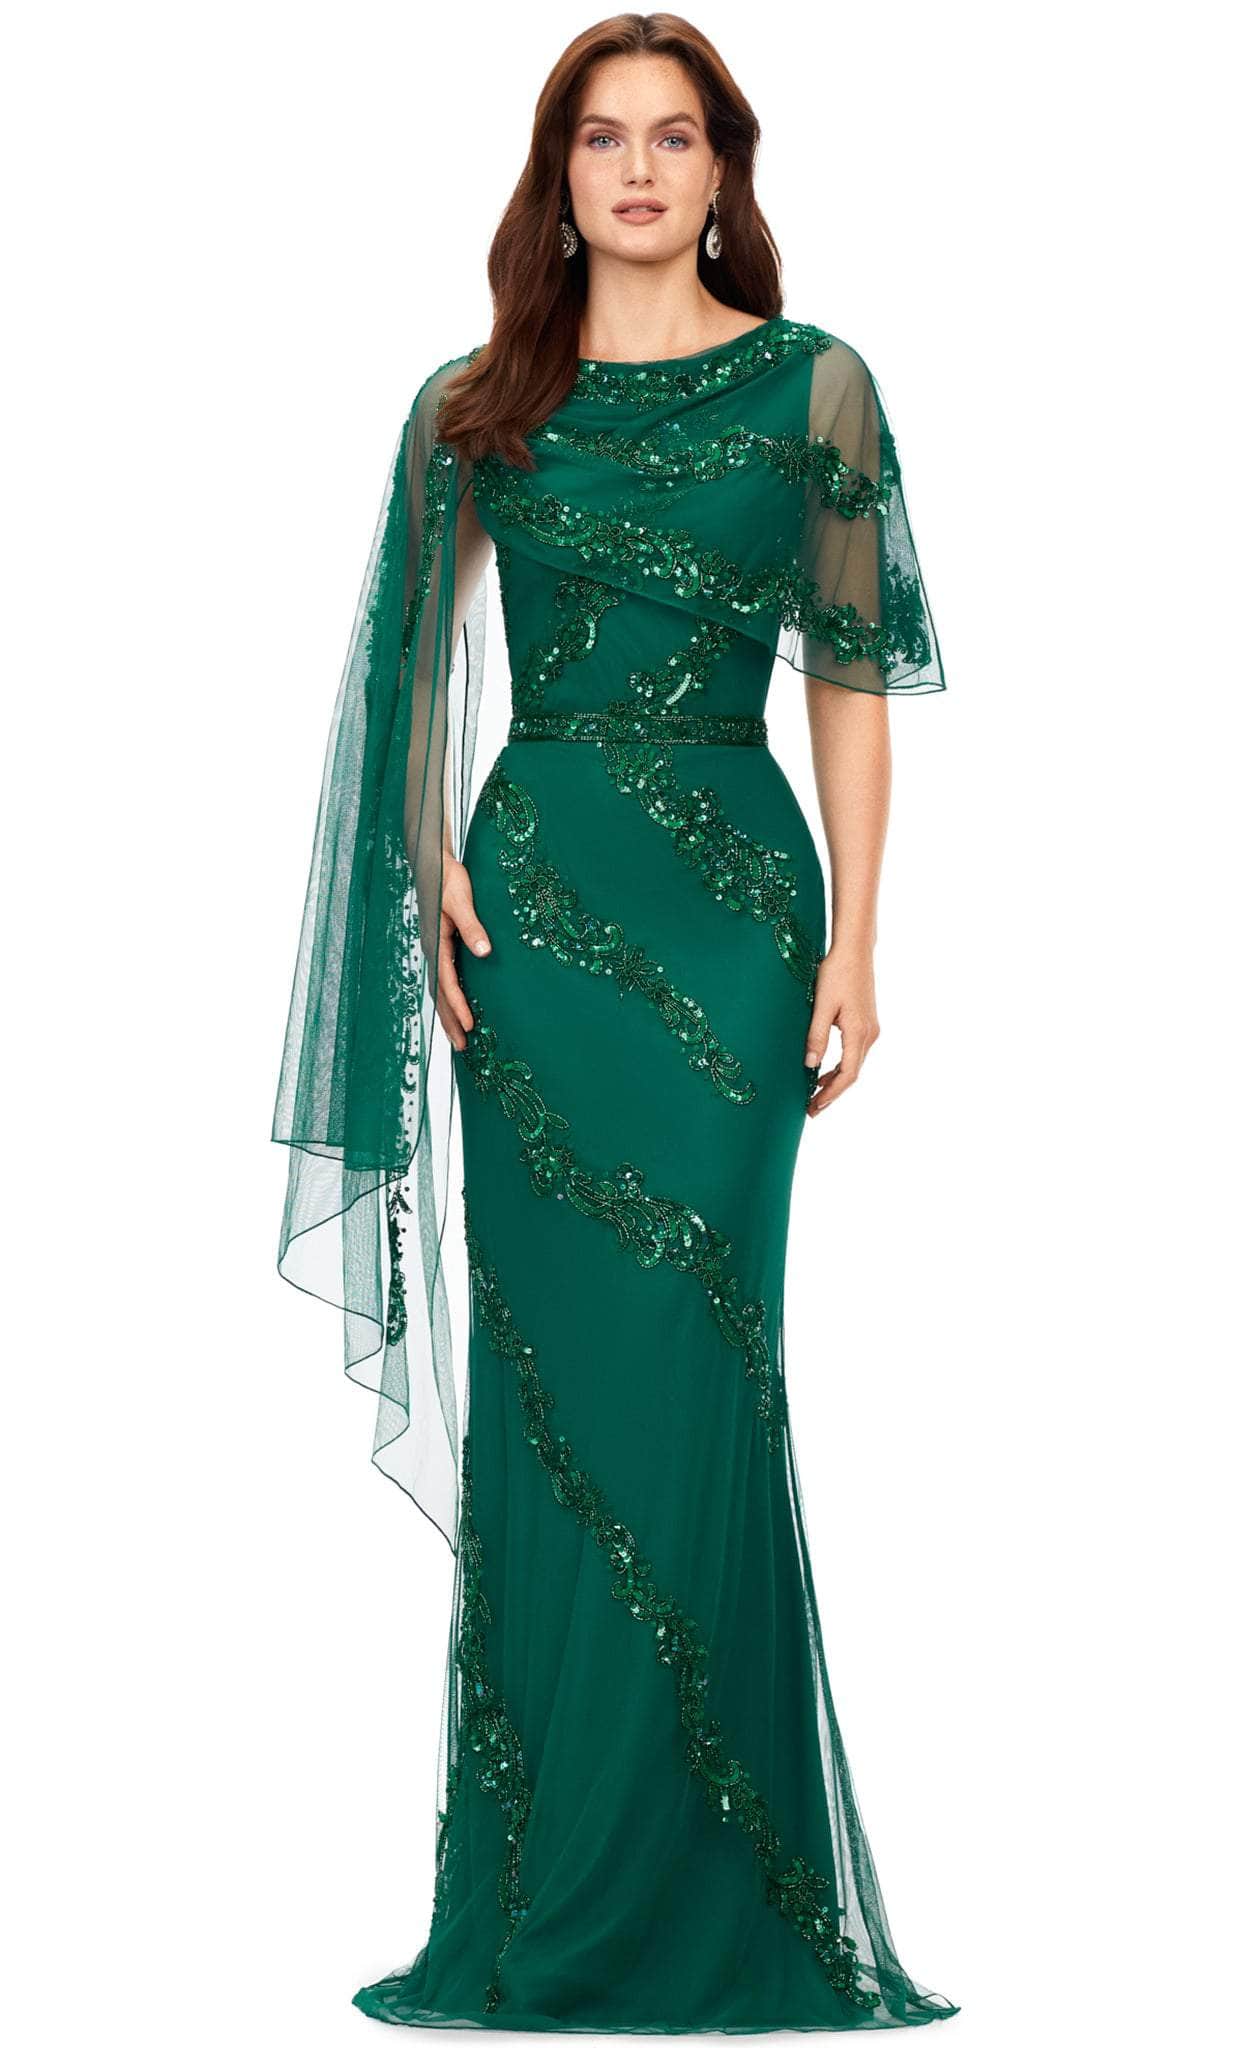 Image of Ashley Lauren 11213 - Asymmetrical Overlay Evening Gown